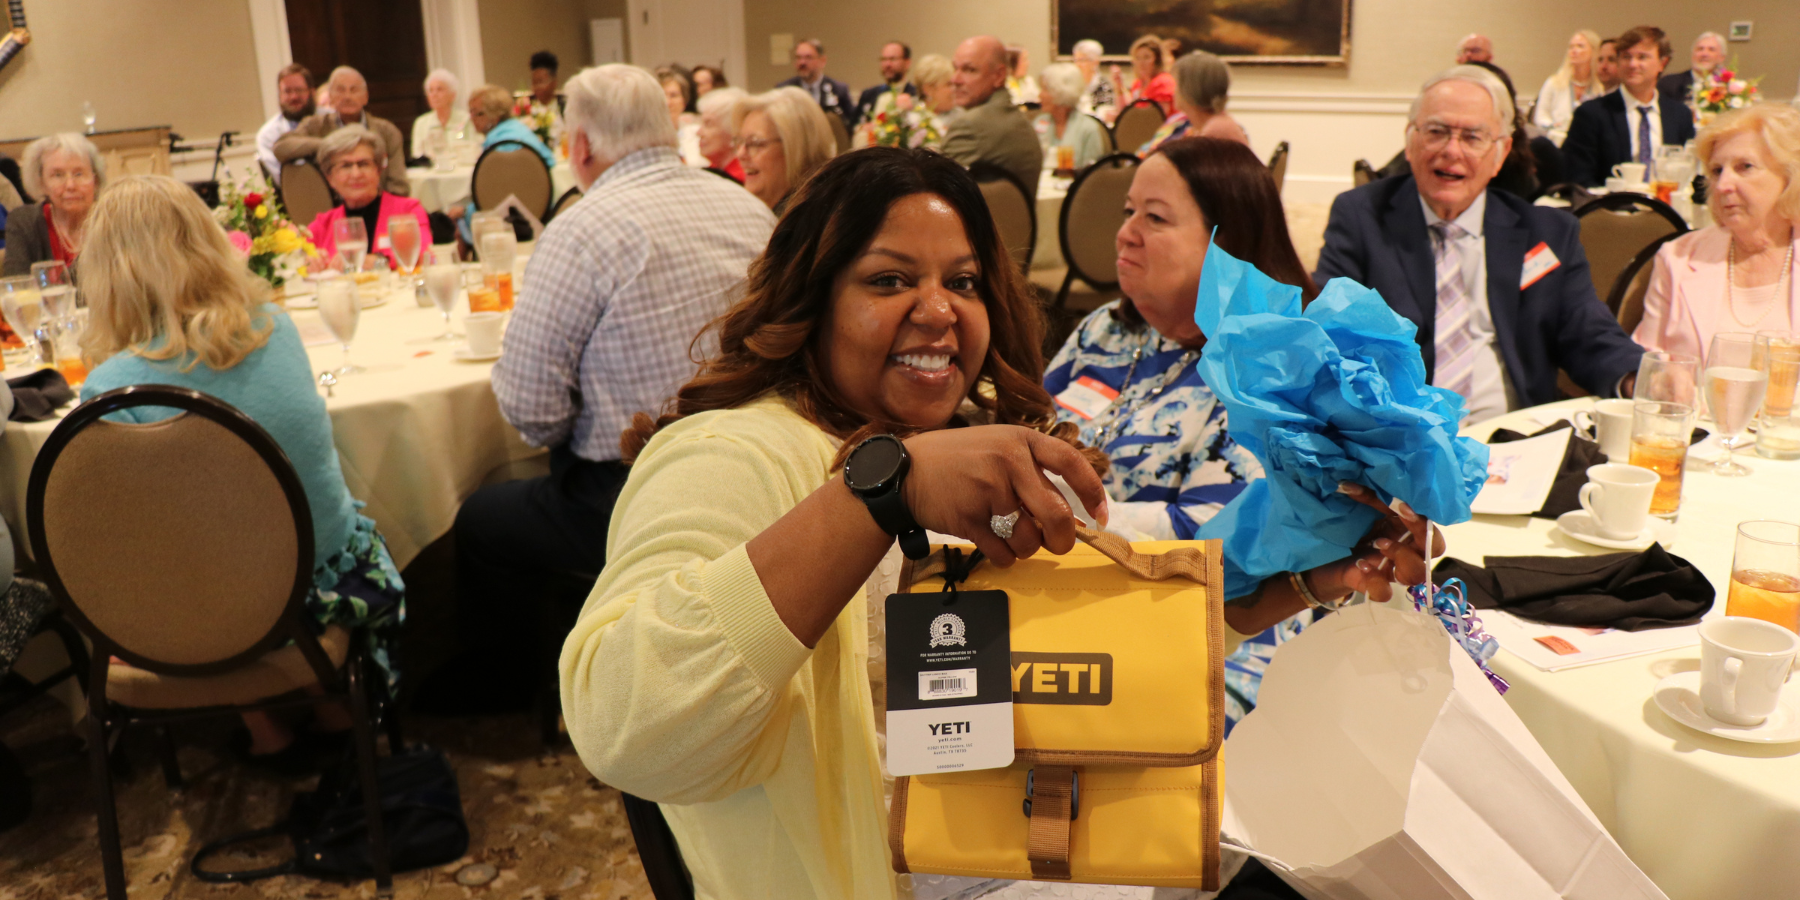 Volunteers&rsquo; hearts of compassion recognized at appreciation luncheon